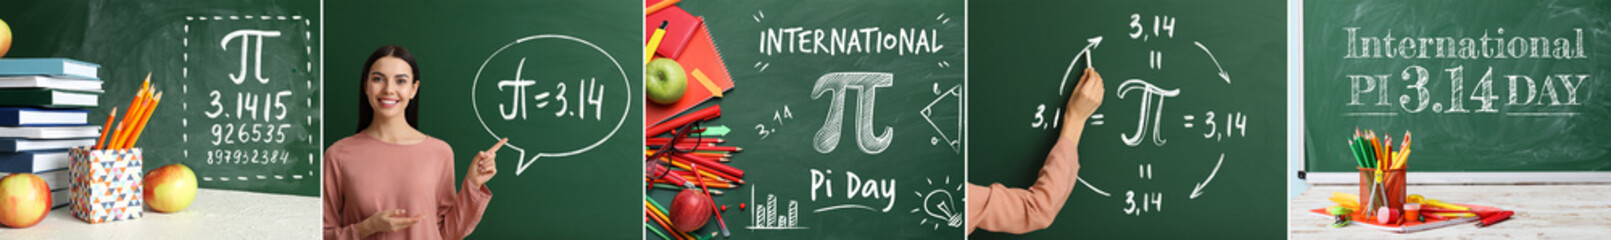 Collage with school stationery and blackboards in classroom. International Pi Day